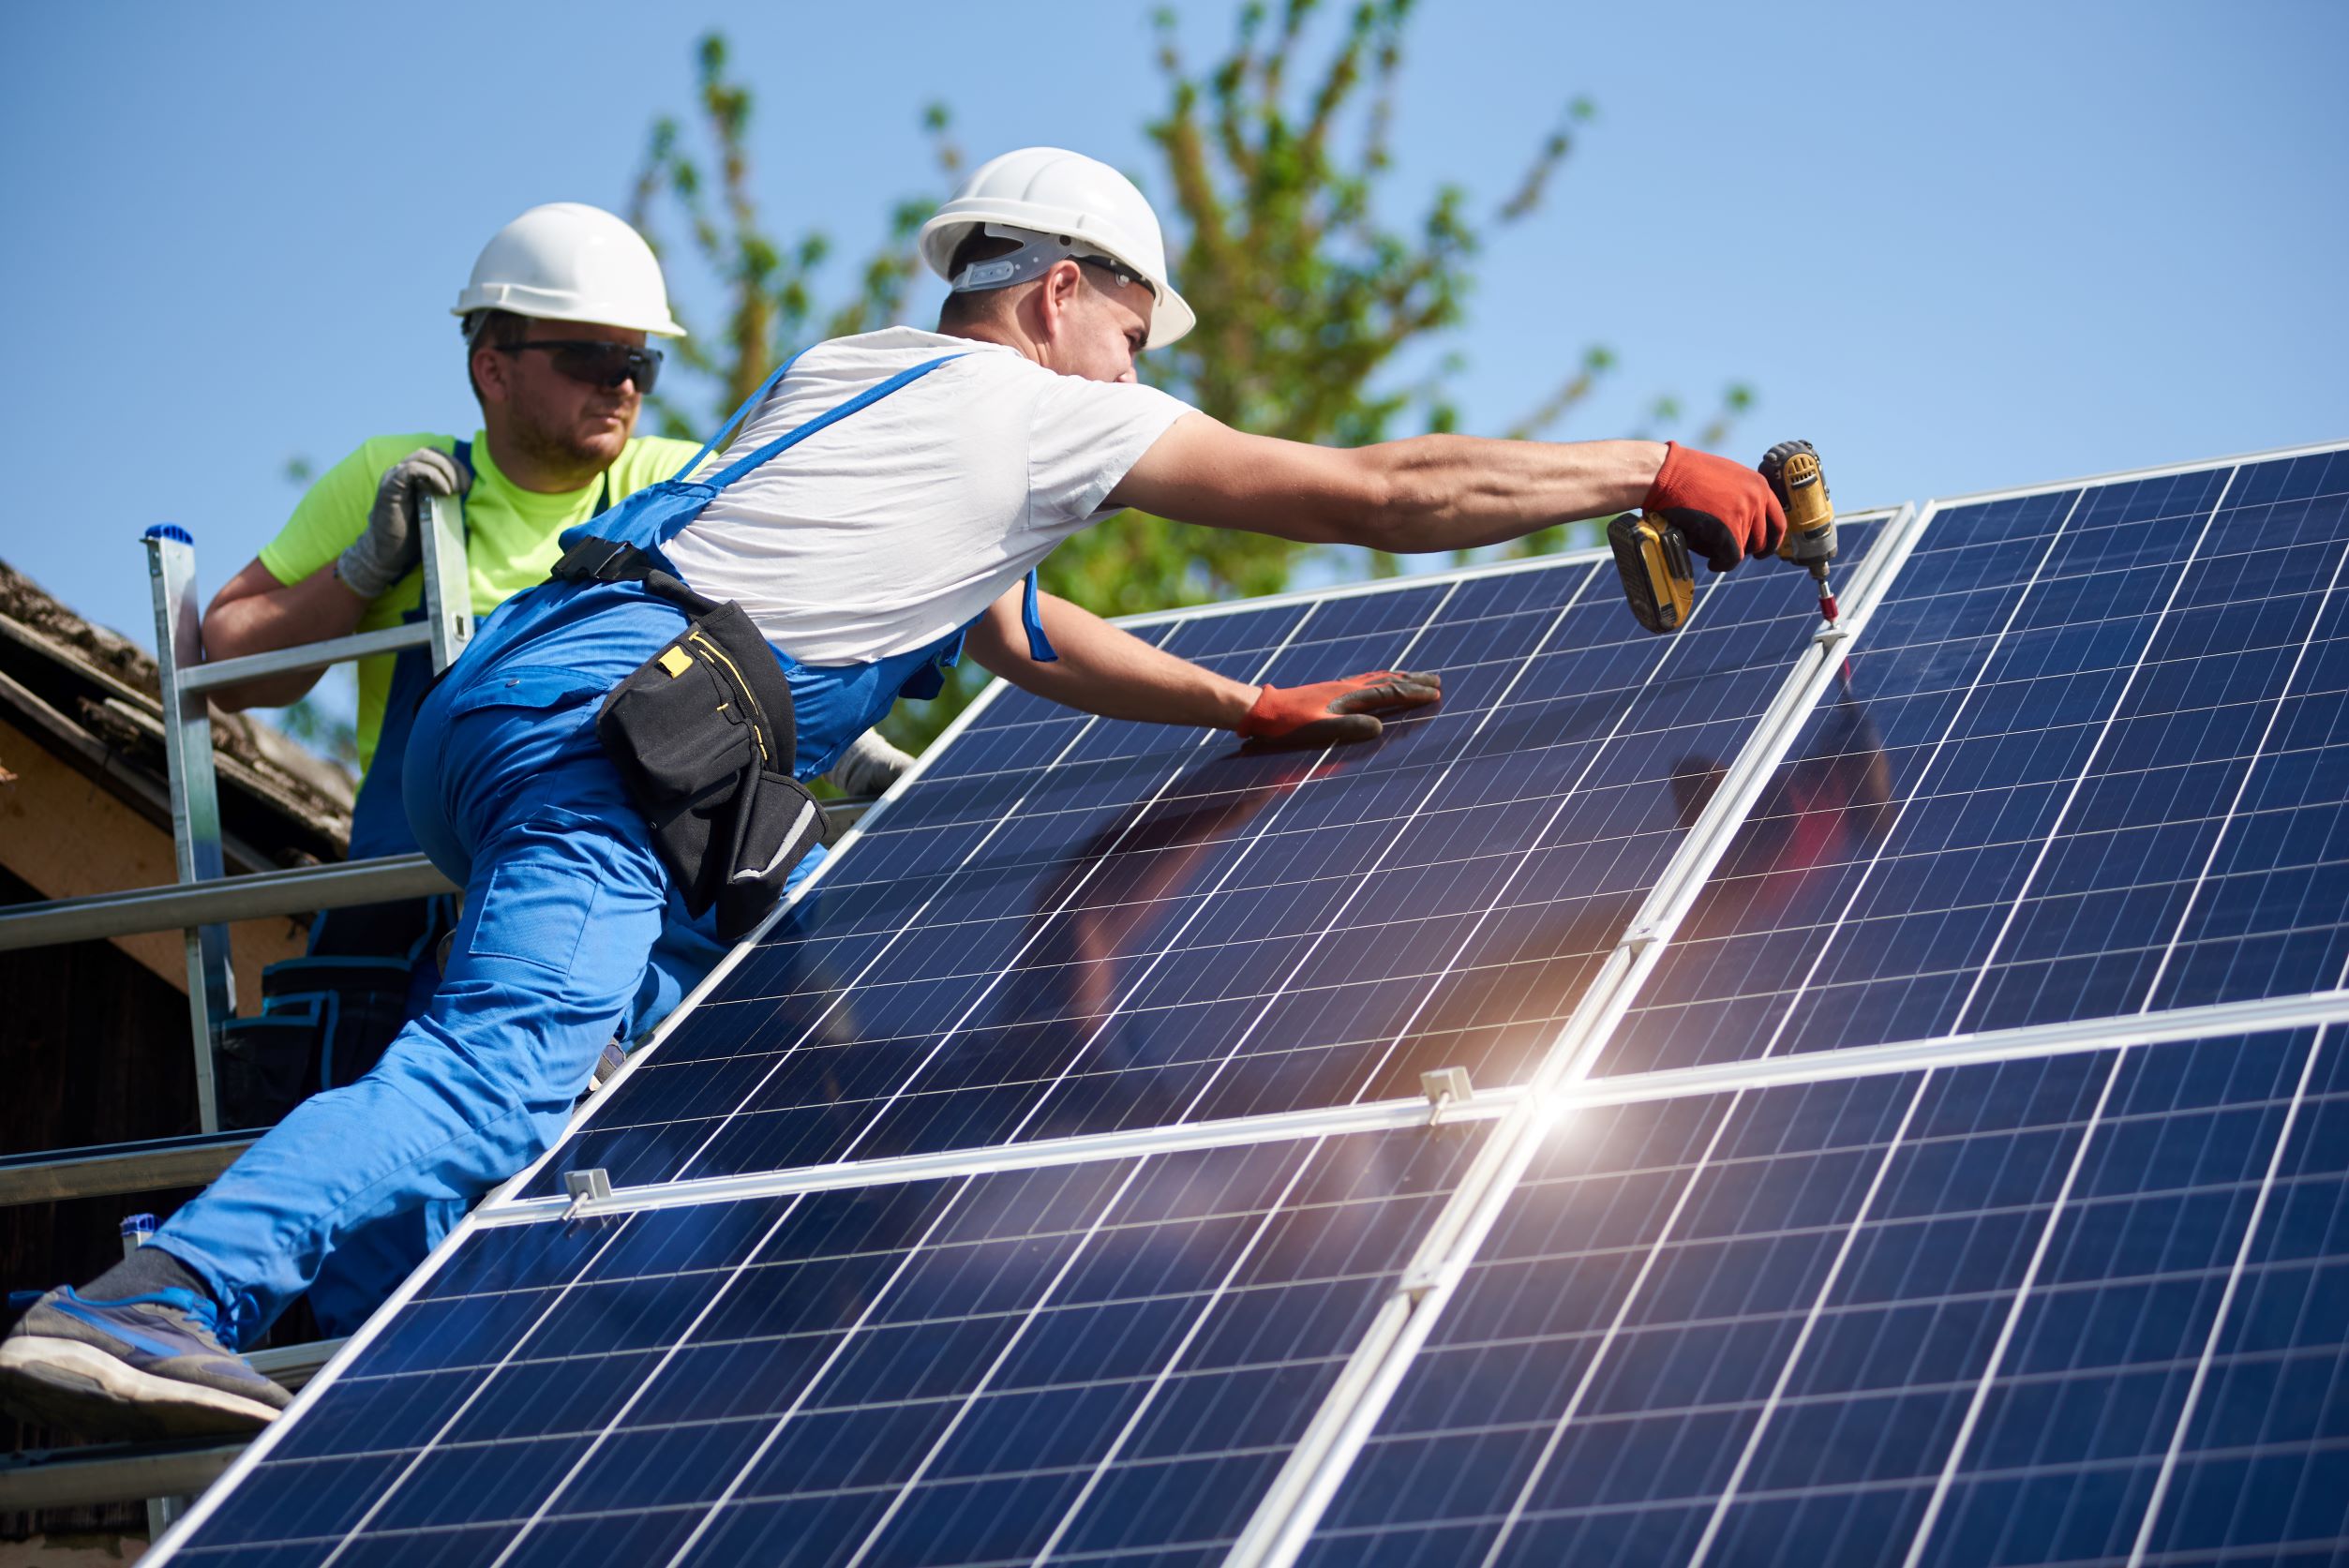 Solar panel installation – finding the right solar installer for you